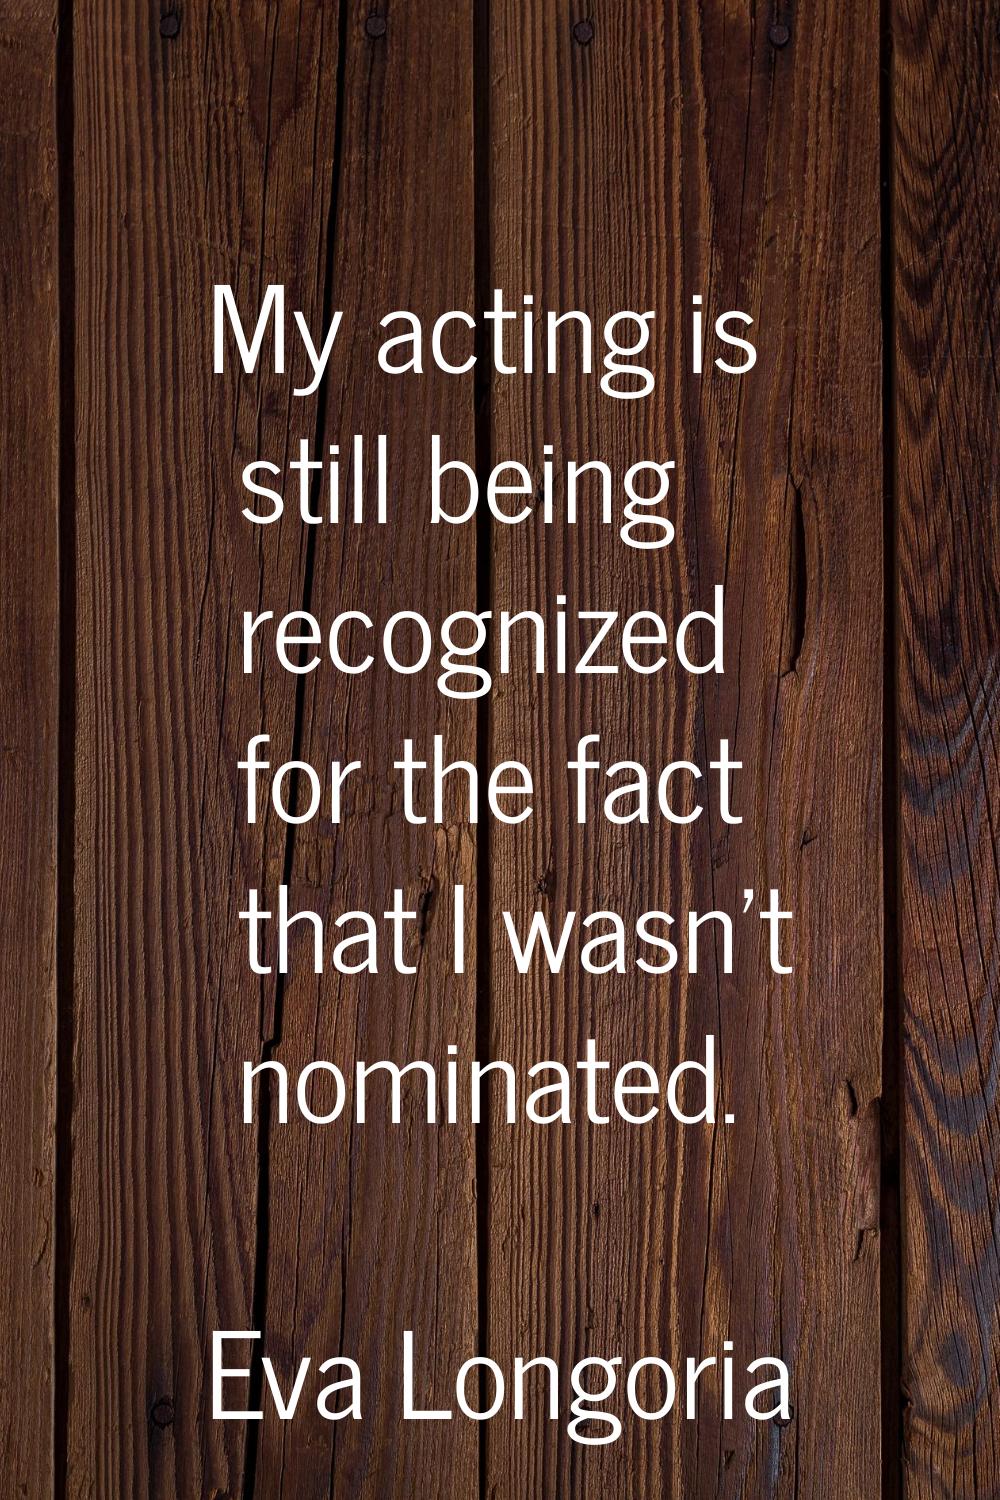 My acting is still being recognized for the fact that I wasn't nominated.